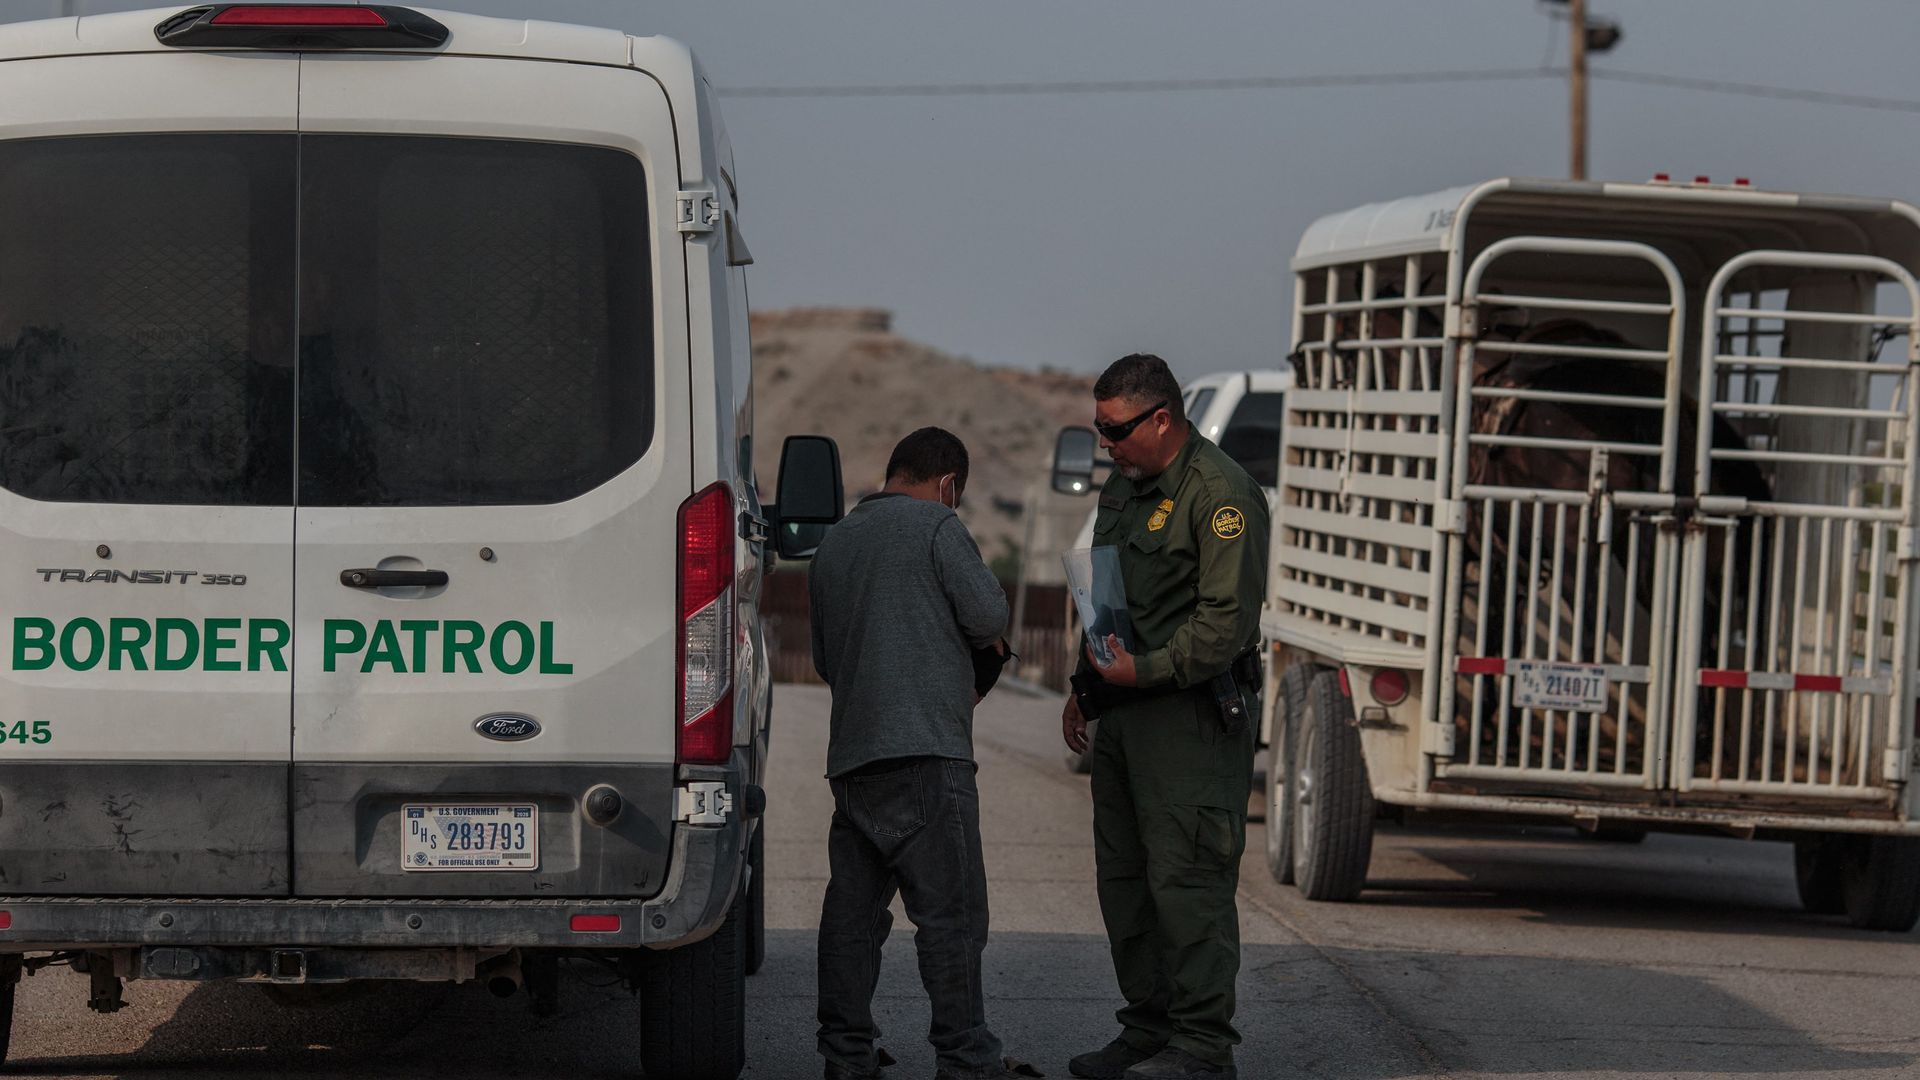 Photo of a Border Patrol officer with a migrant next to a parked van that says "Border Patrol"